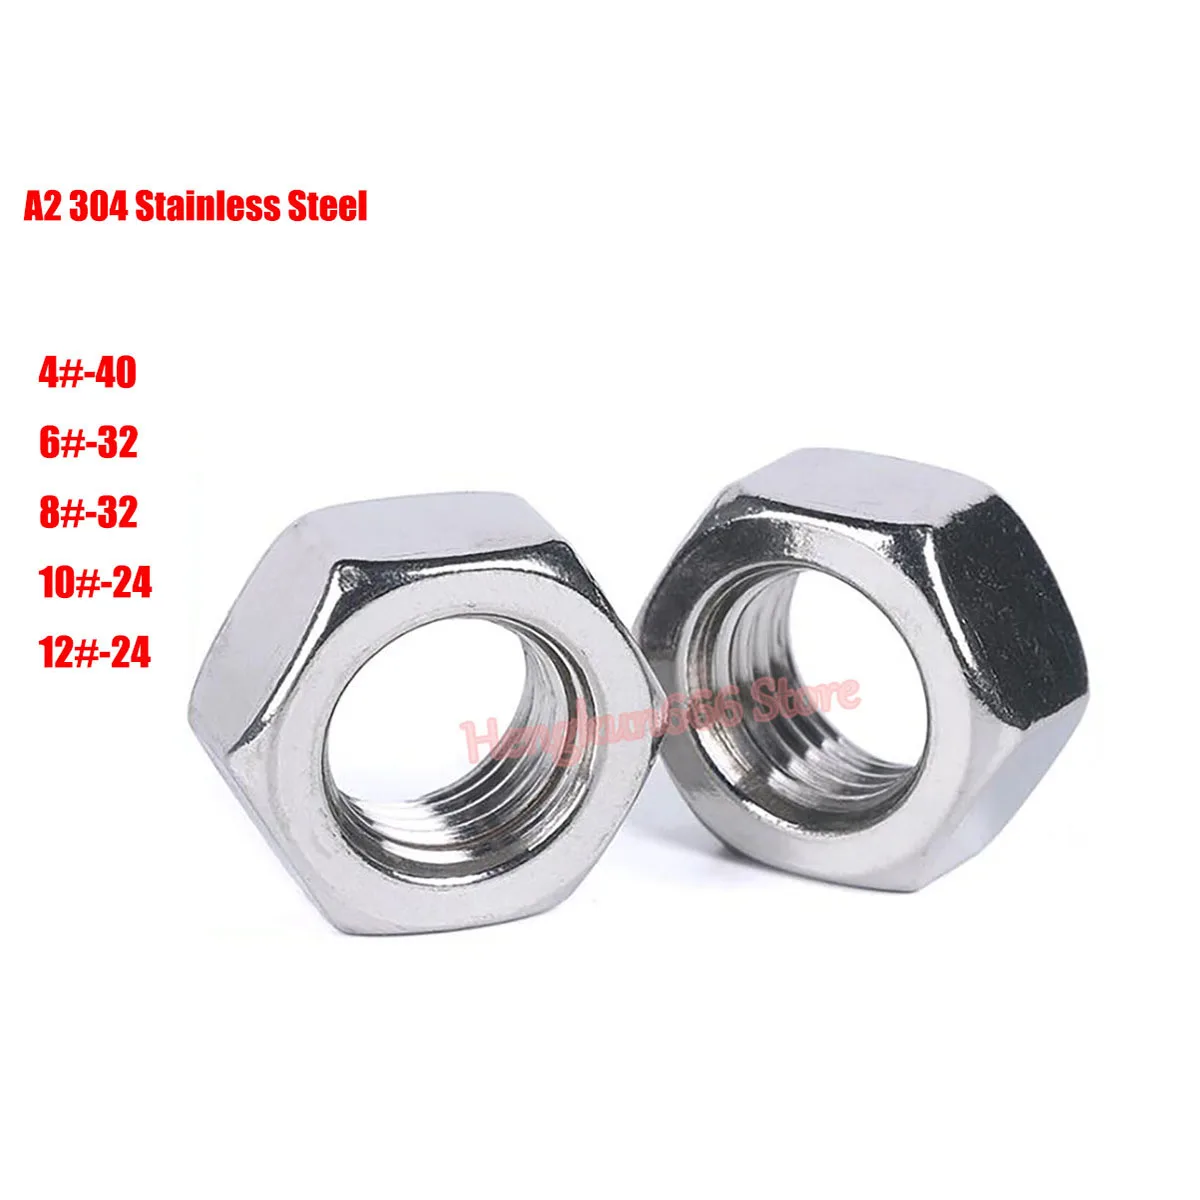 

UNC 4#-40 6#-32 8#-32 10#-24 12#-24 Hexagon Hex Nuts A2 304 Stainless Steel Nut US Standard Coarse Thread